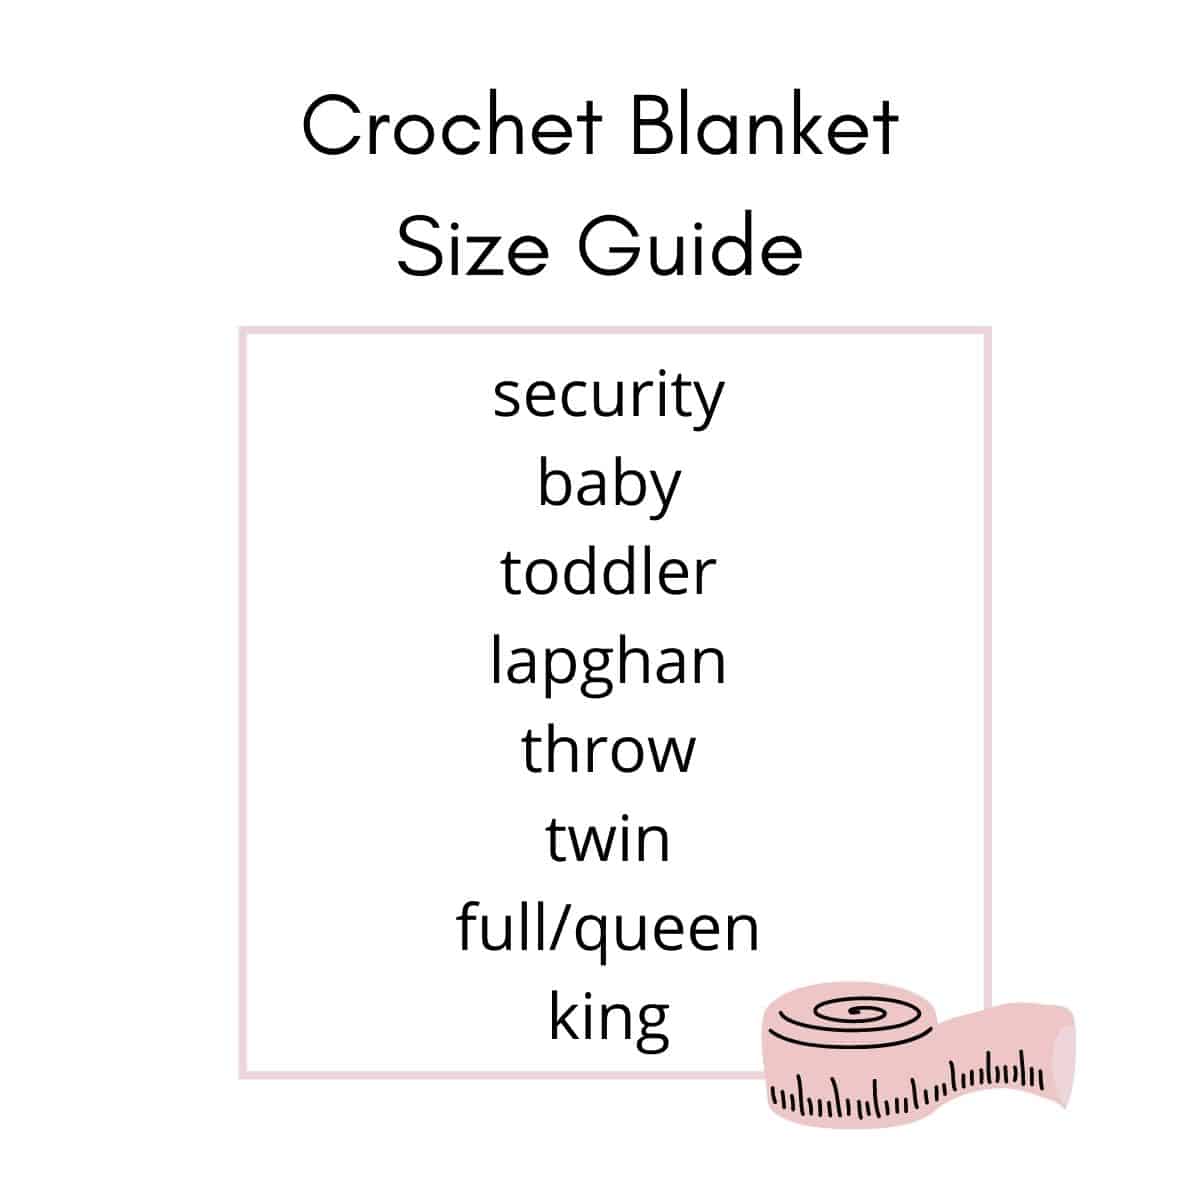 a sizing guide for crochet blankets